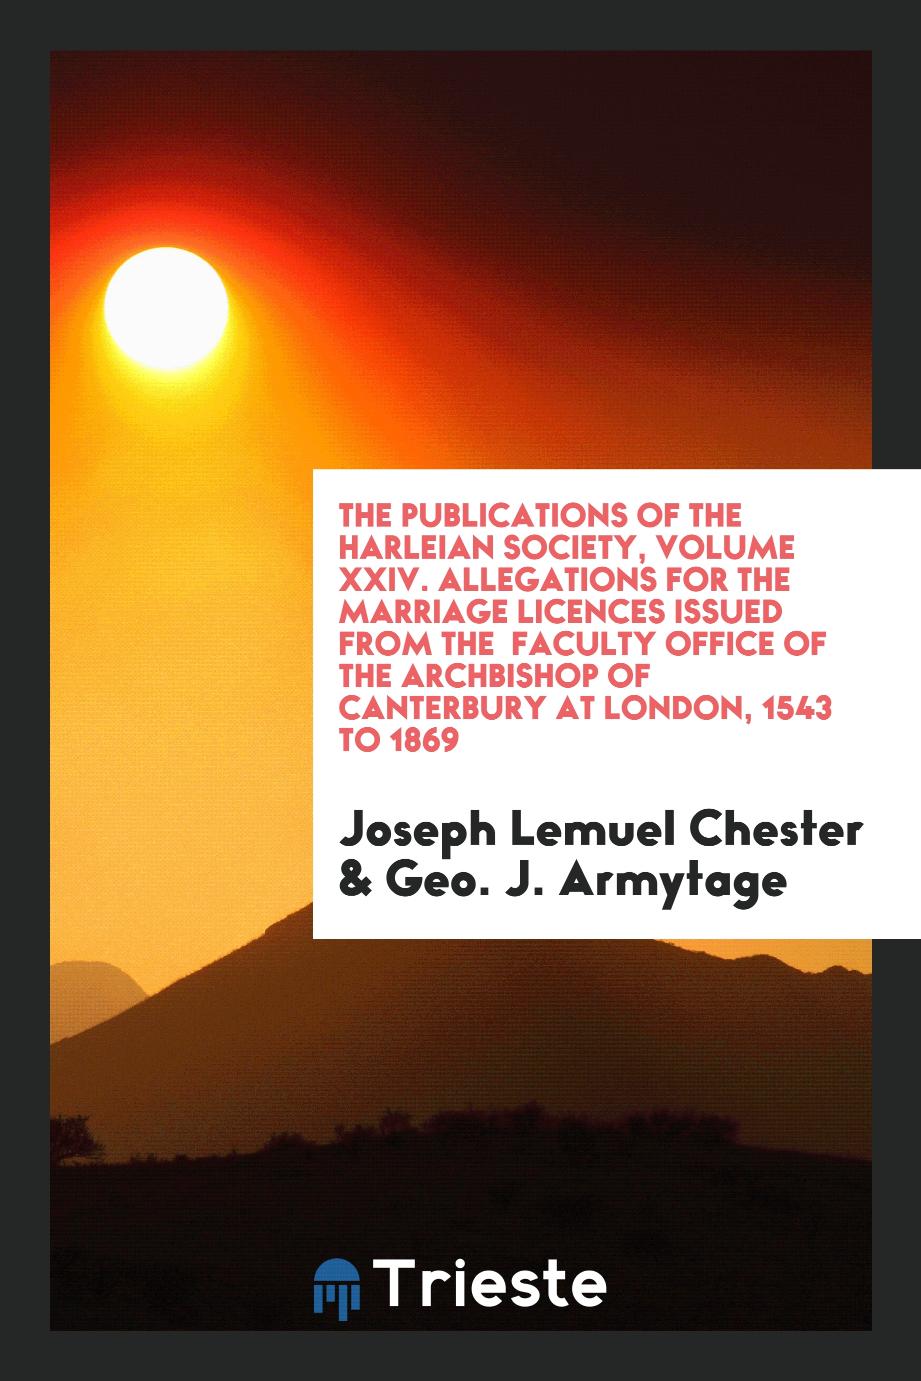 The Publications of the Harleian Society, Volume XXIV. Allegations for the Marriage Licences Issued from the Faculty Office of the Archbishop of Canterbury at London, 1543 to 1869